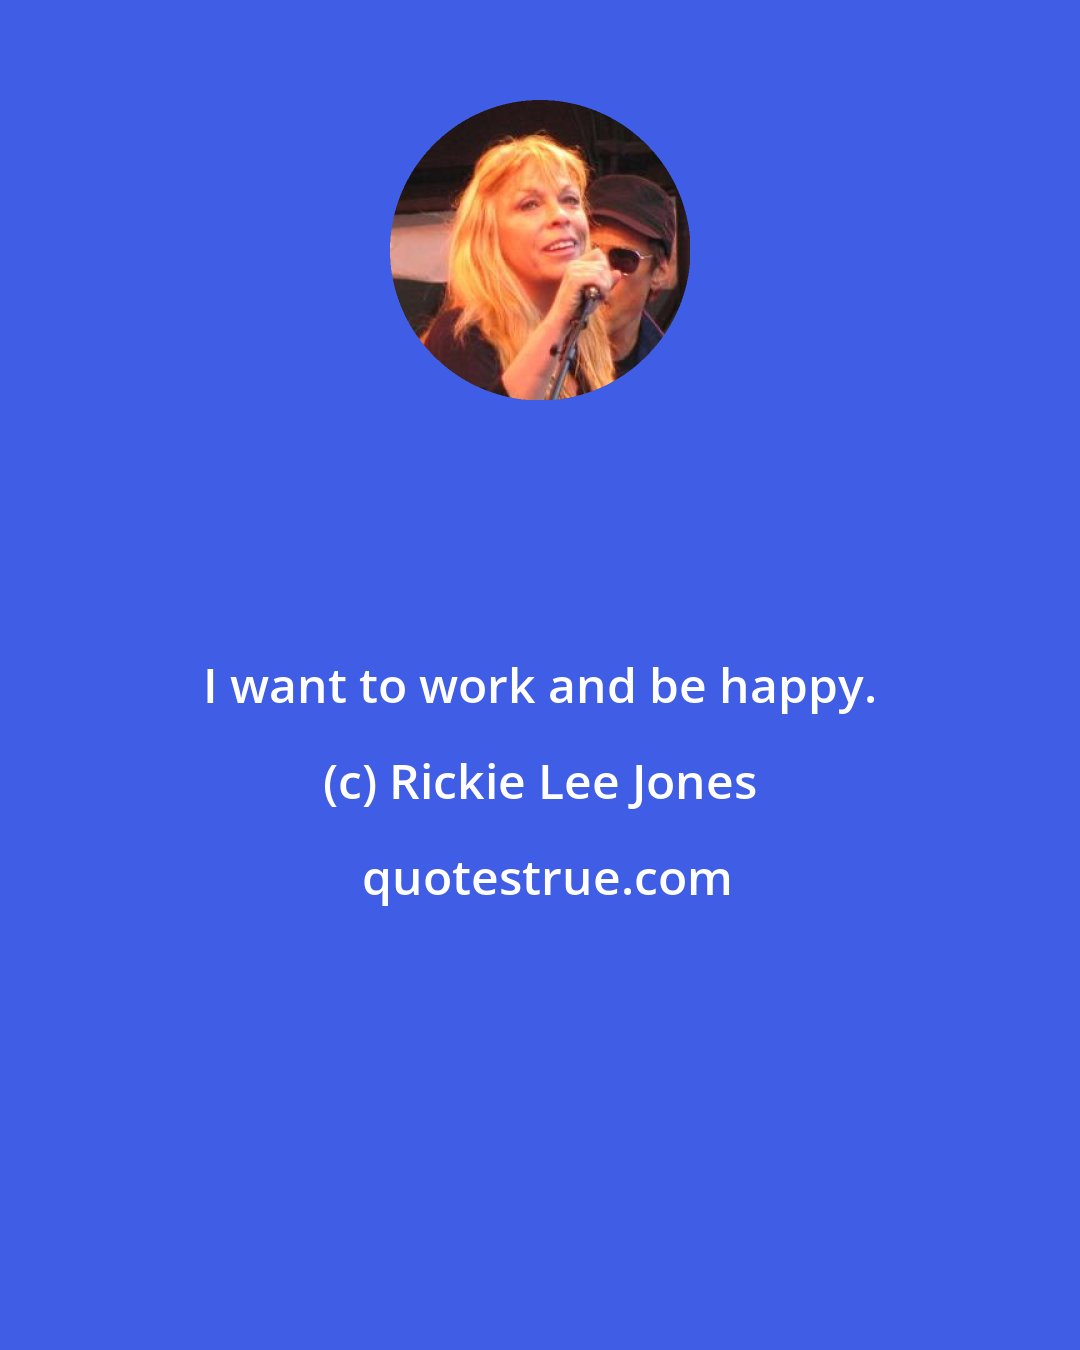 Rickie Lee Jones: I want to work and be happy.